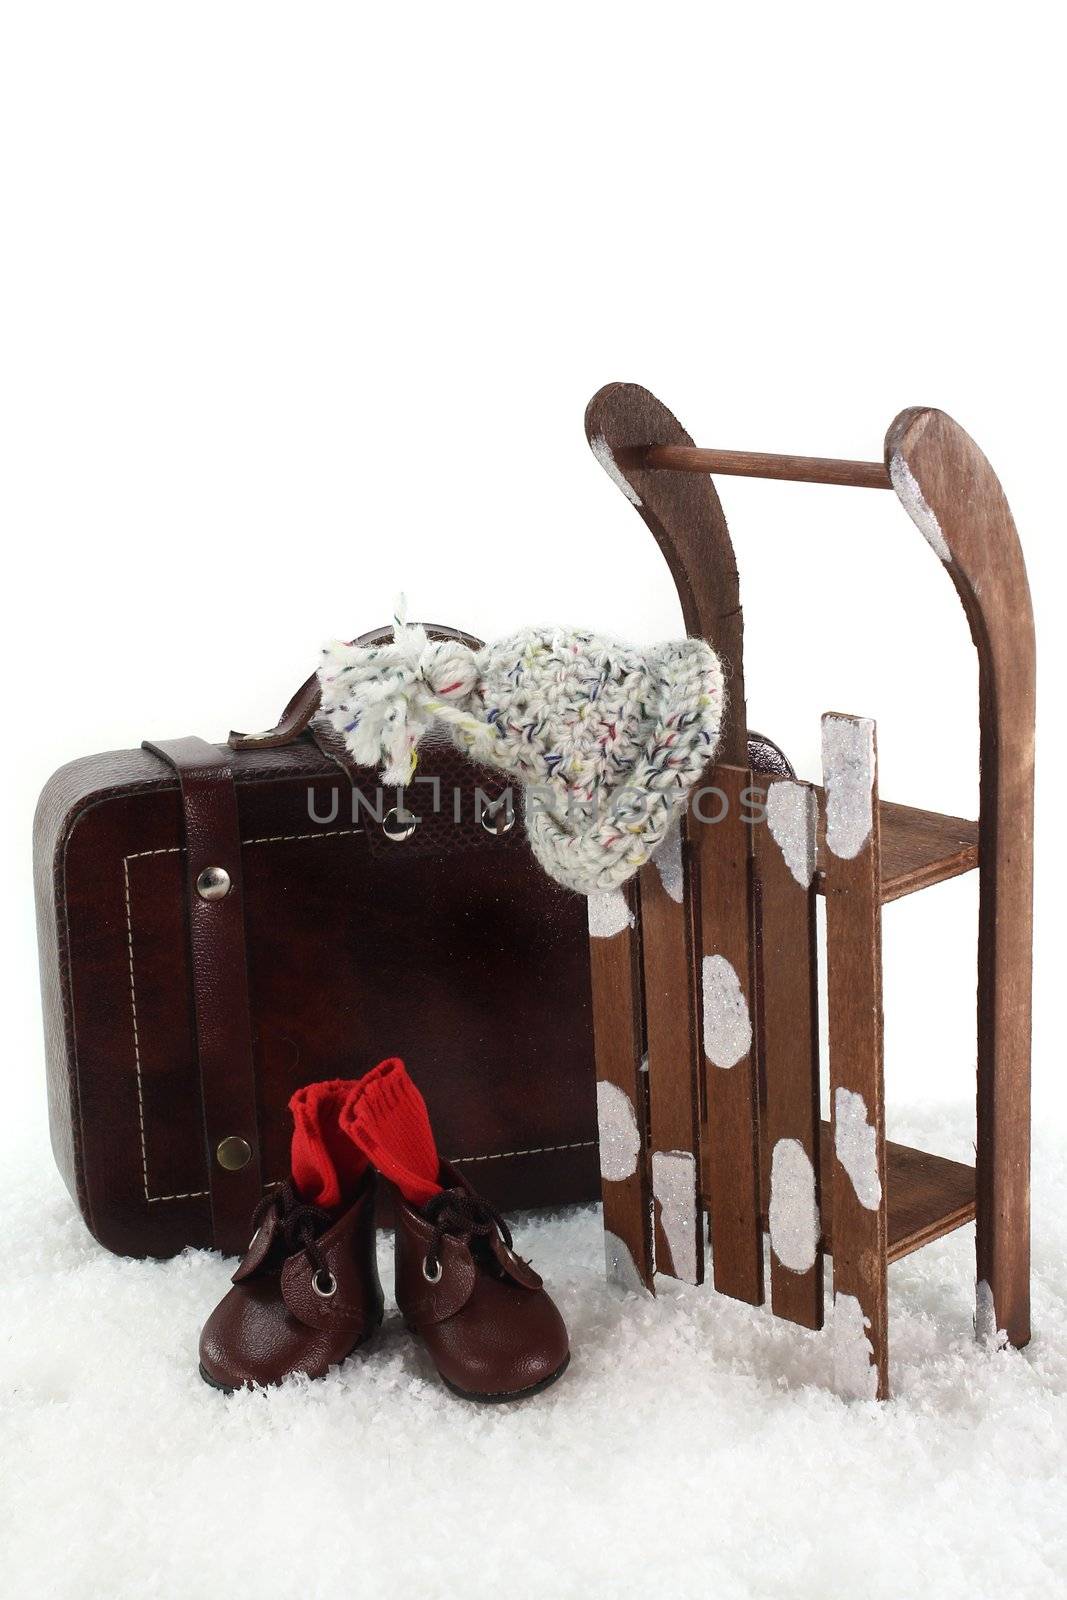 Sled, winter clothes and suitcases in front of white background